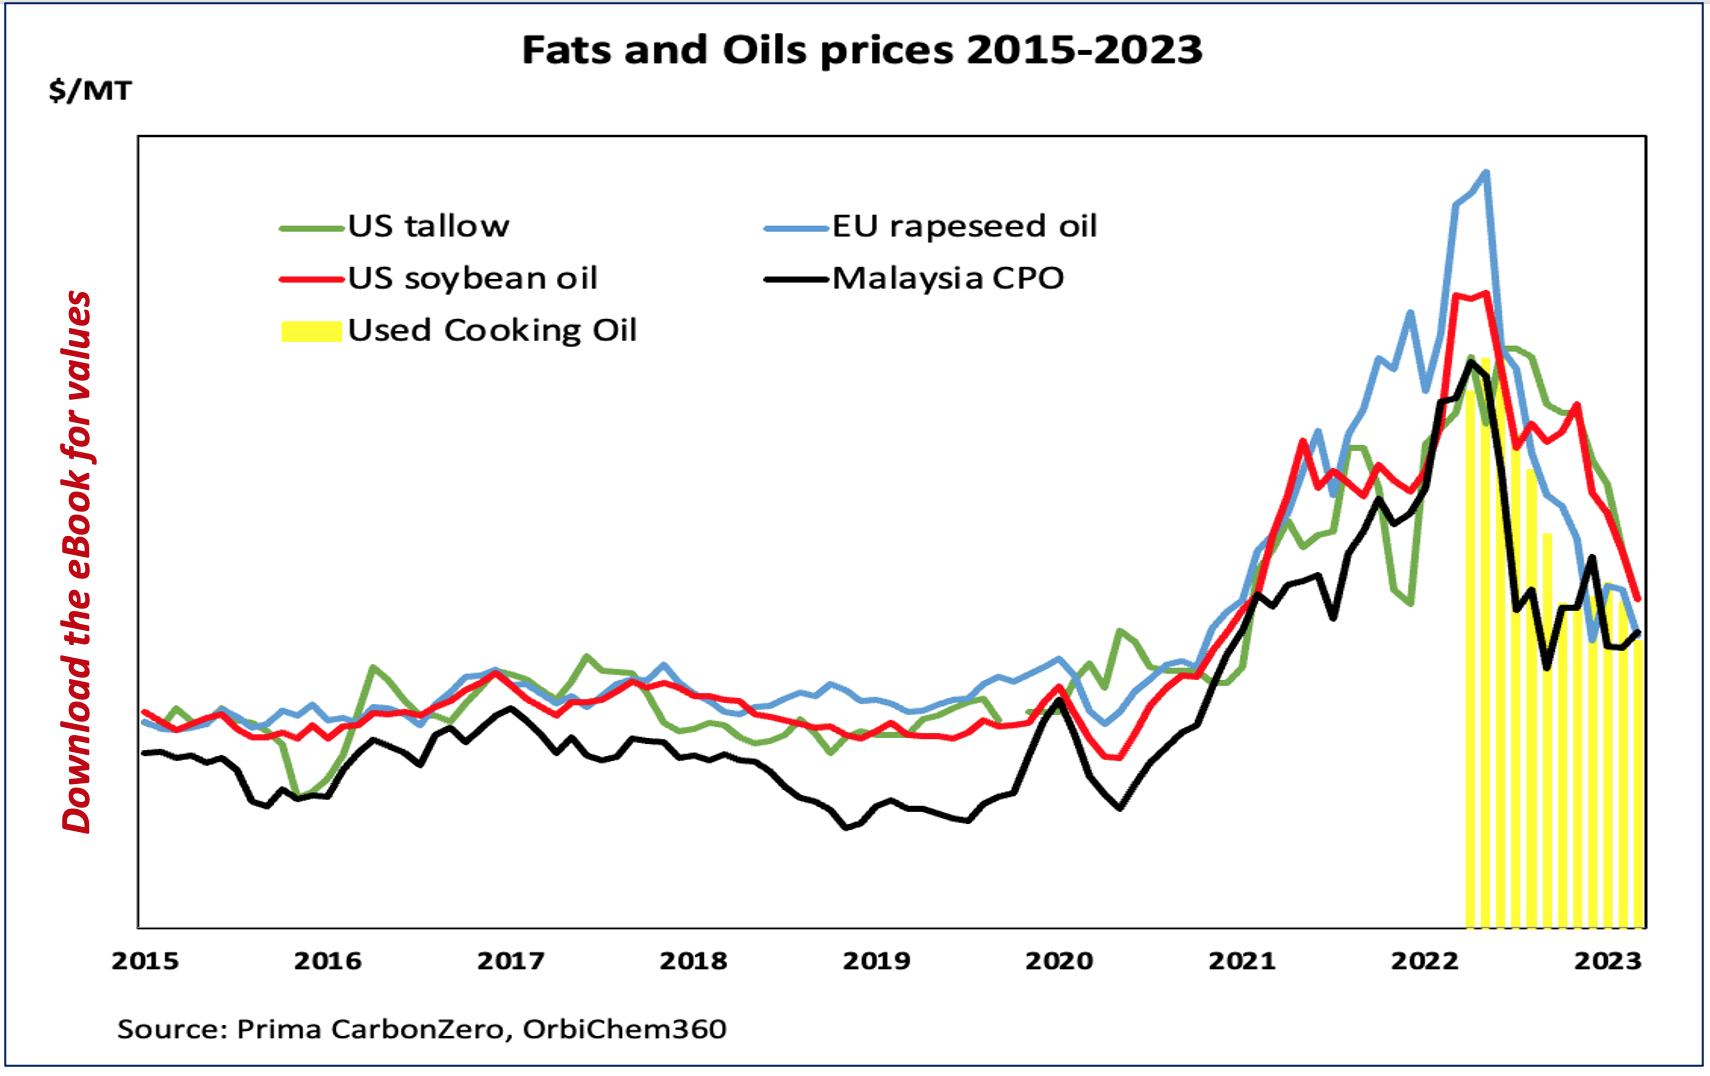 Graph shows fats and oils-feedstock prices 2015 to 2023.